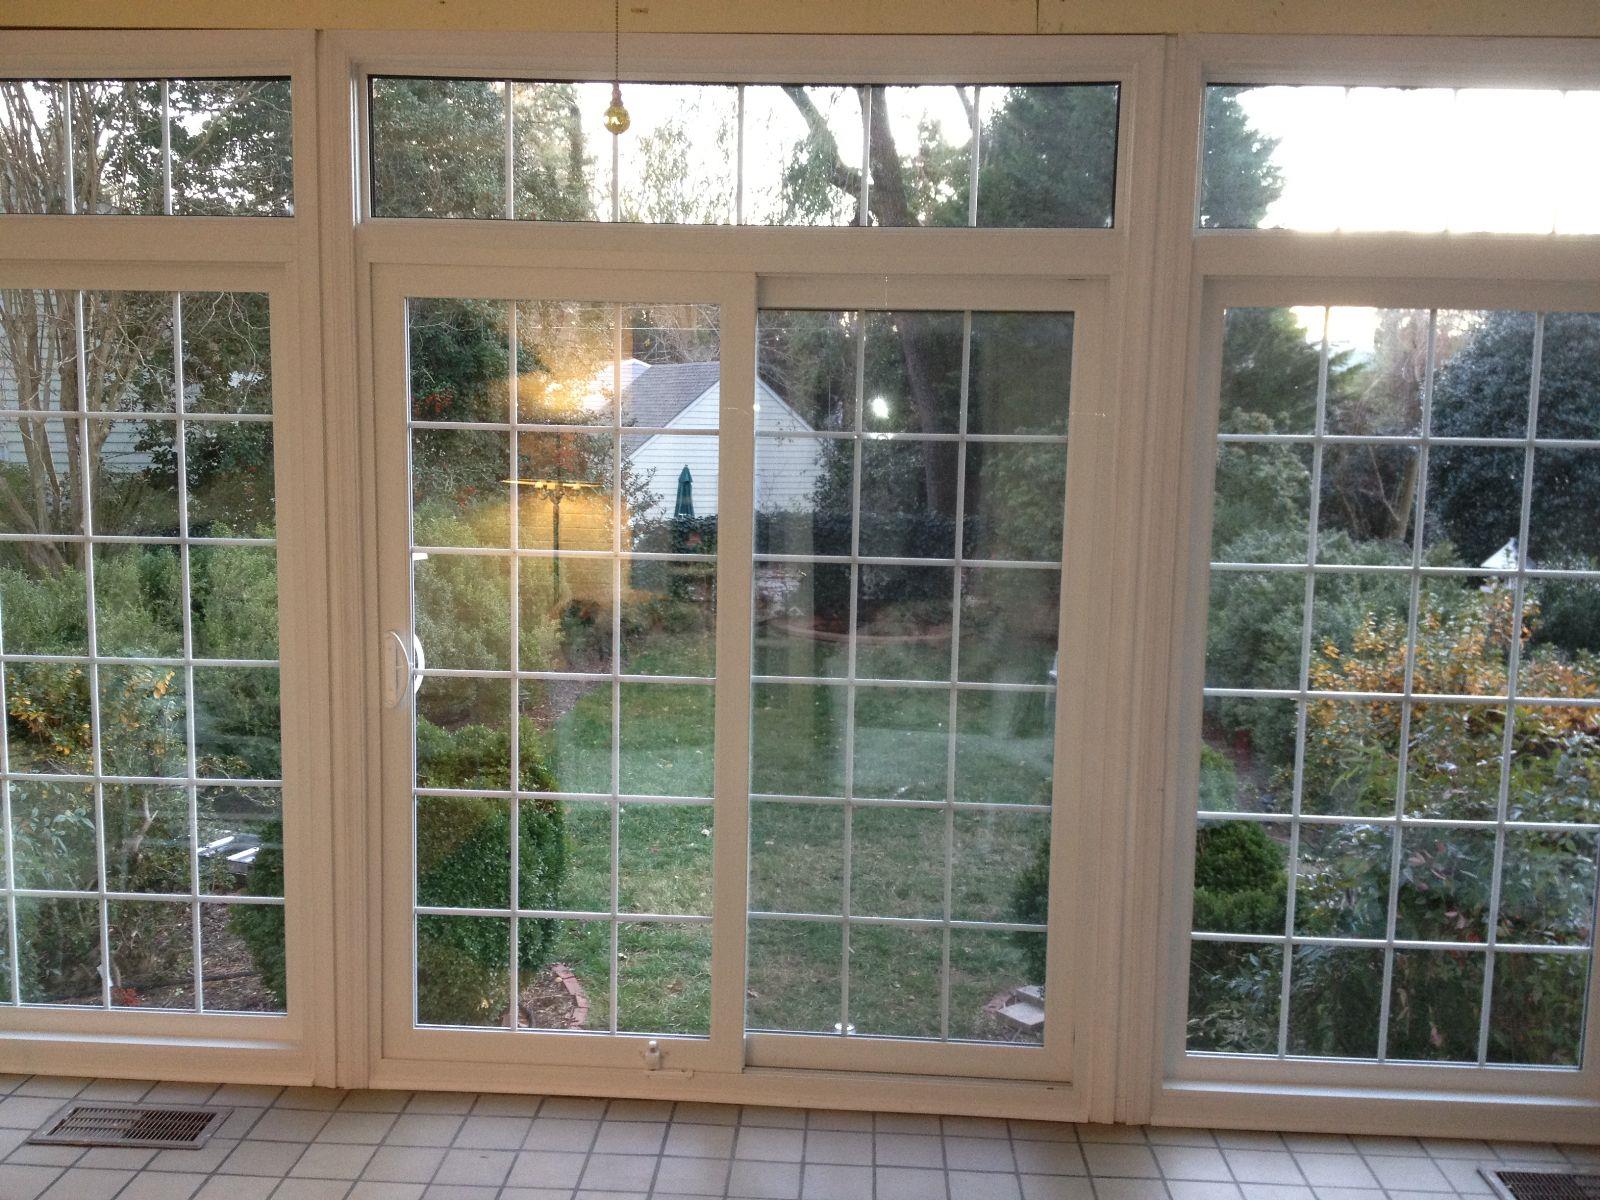 Sunroom Facelift Has Style and Function